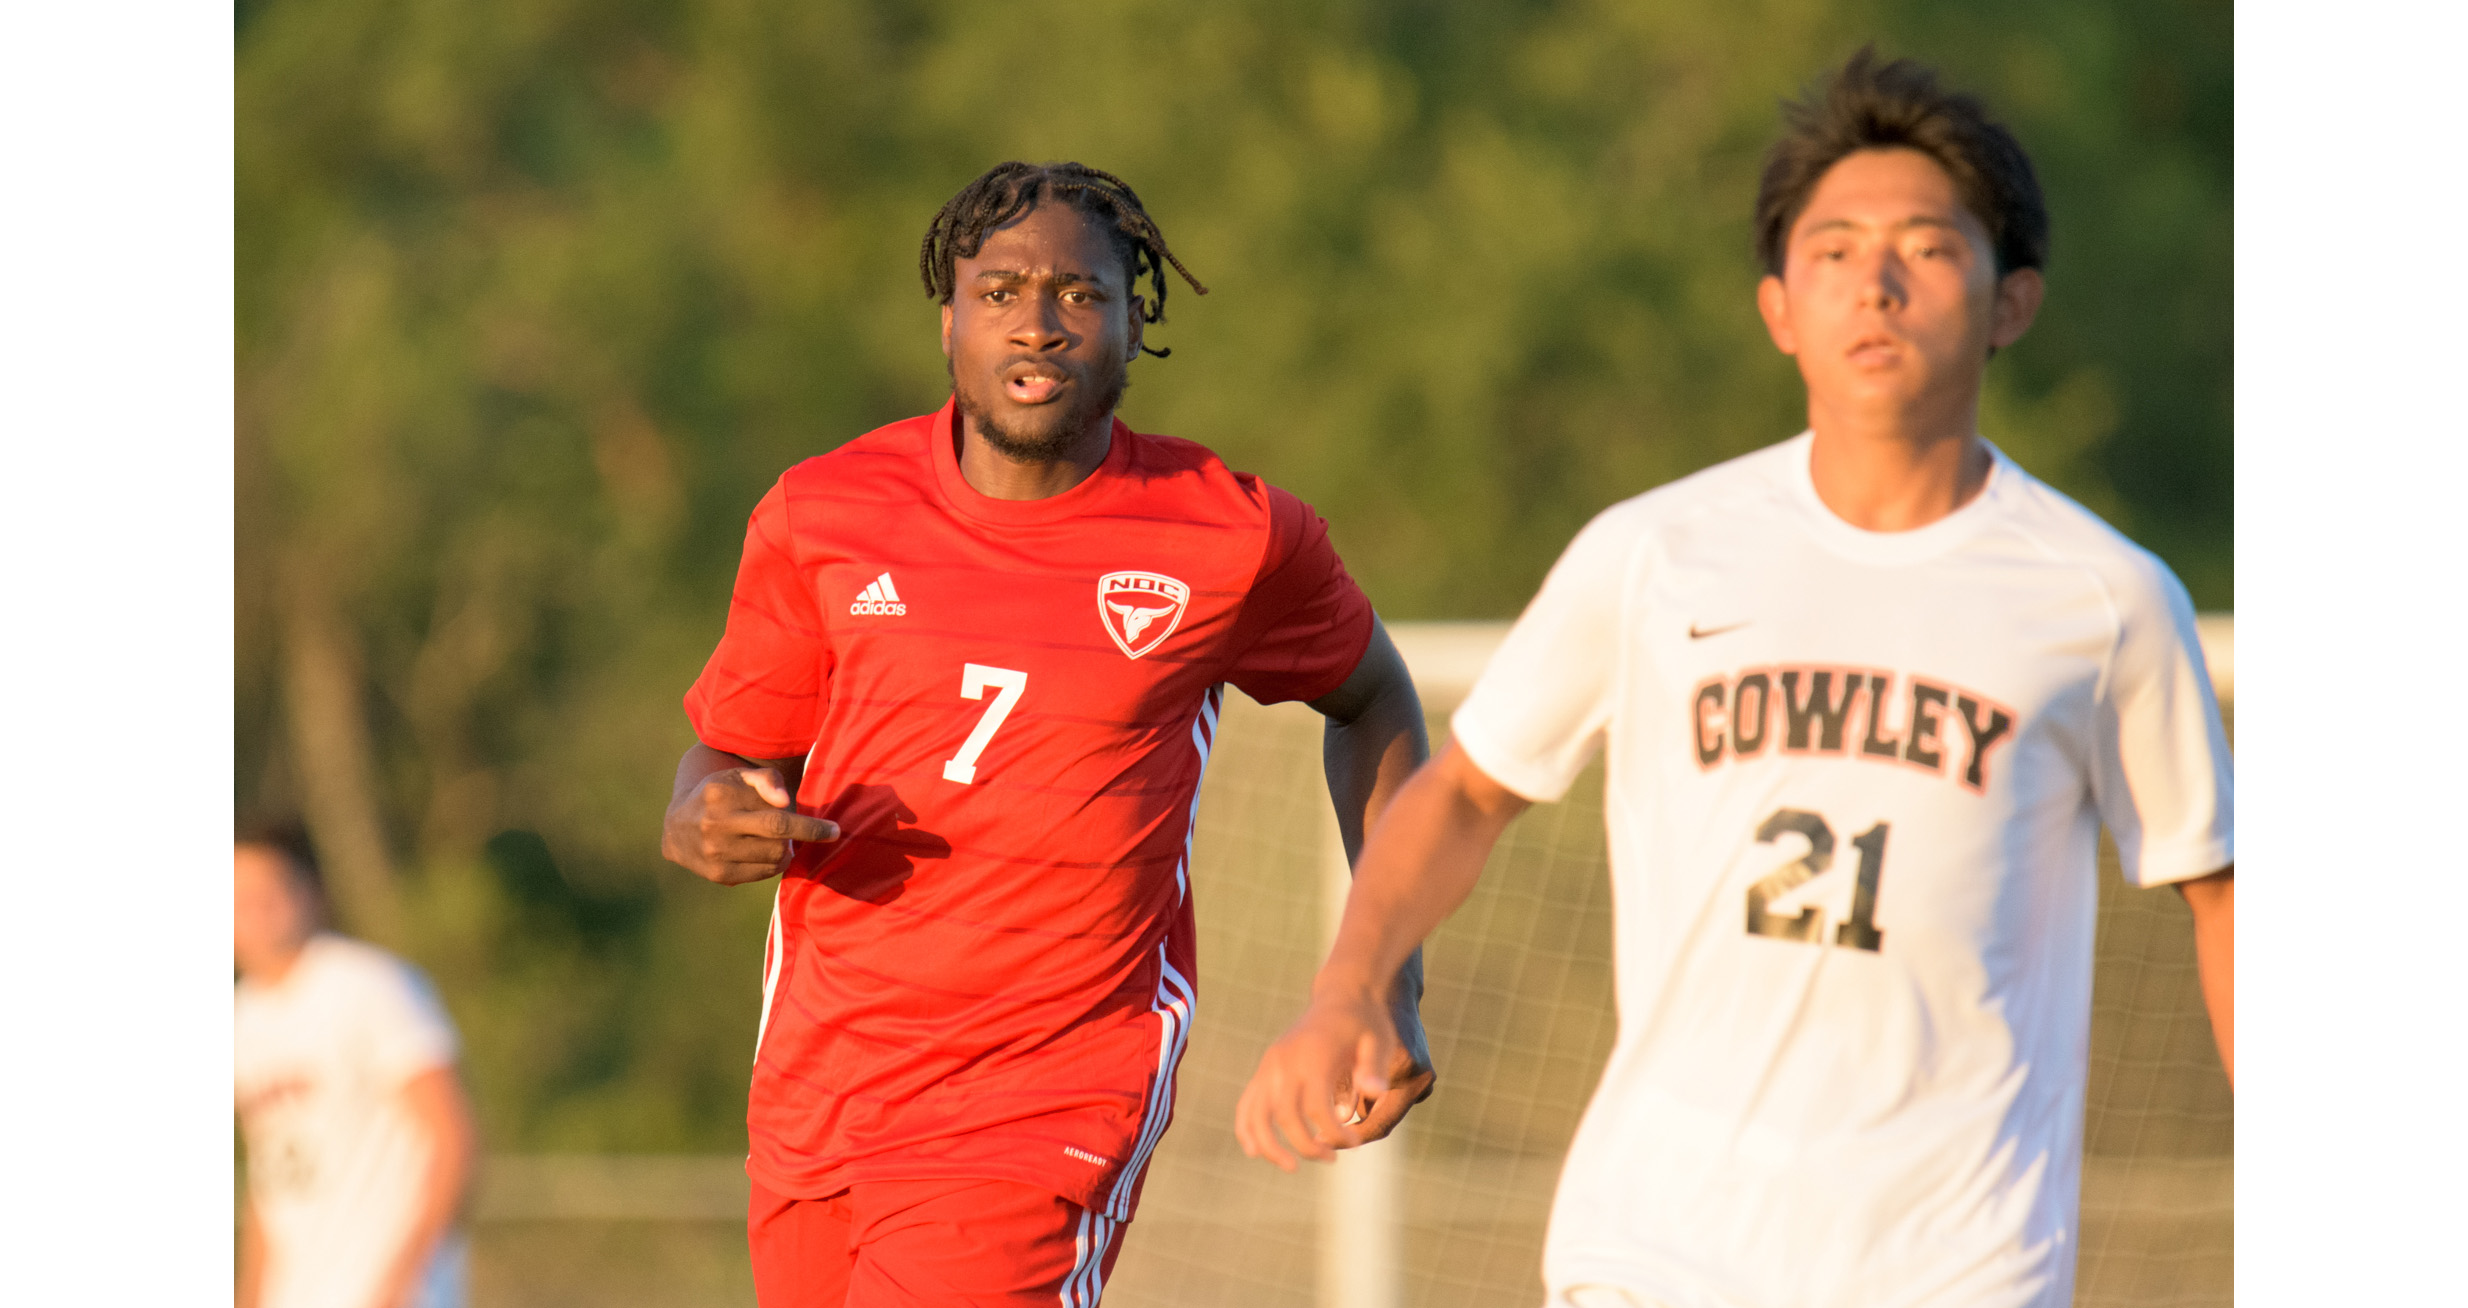 Assanie Brown scored the lone Mavs' goal against Cowley in a 2-1 NOC loss.